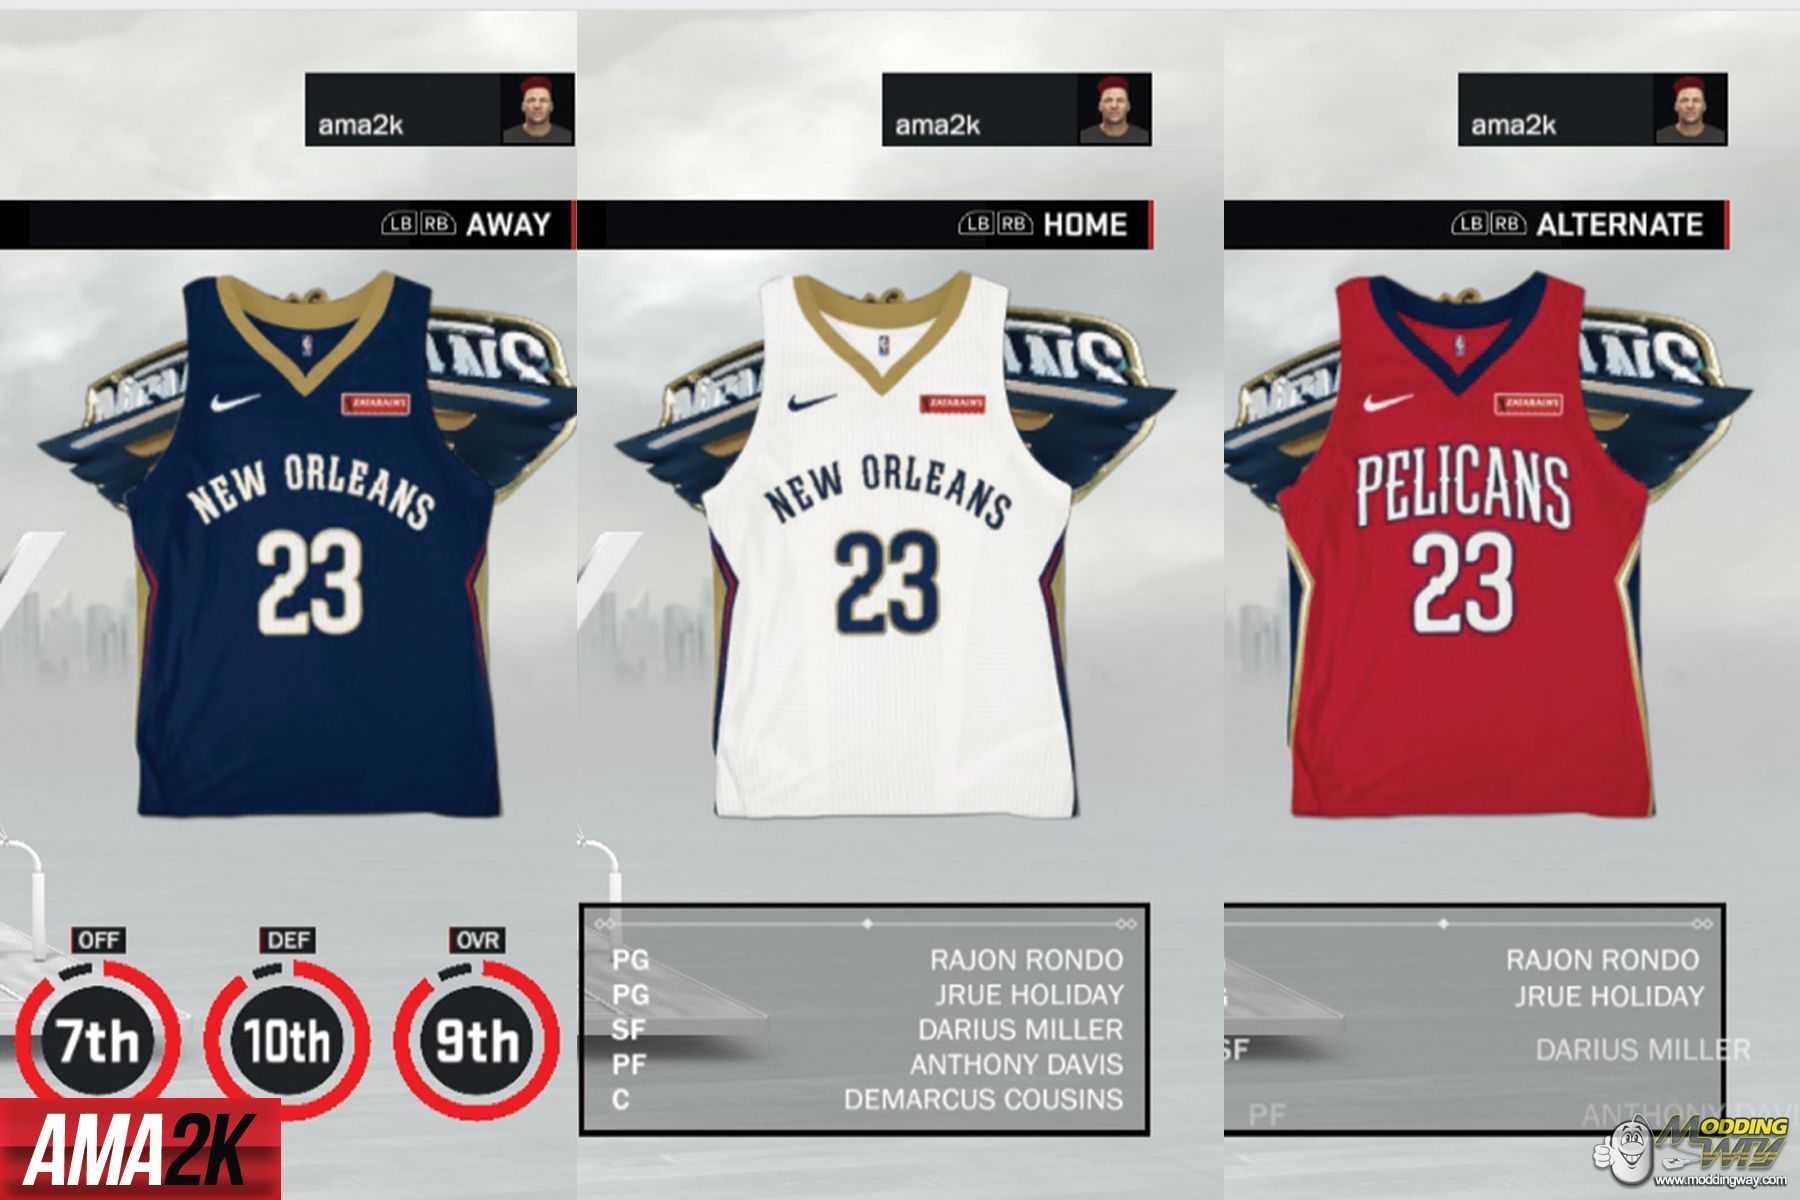 new orleans pelicans home jersey